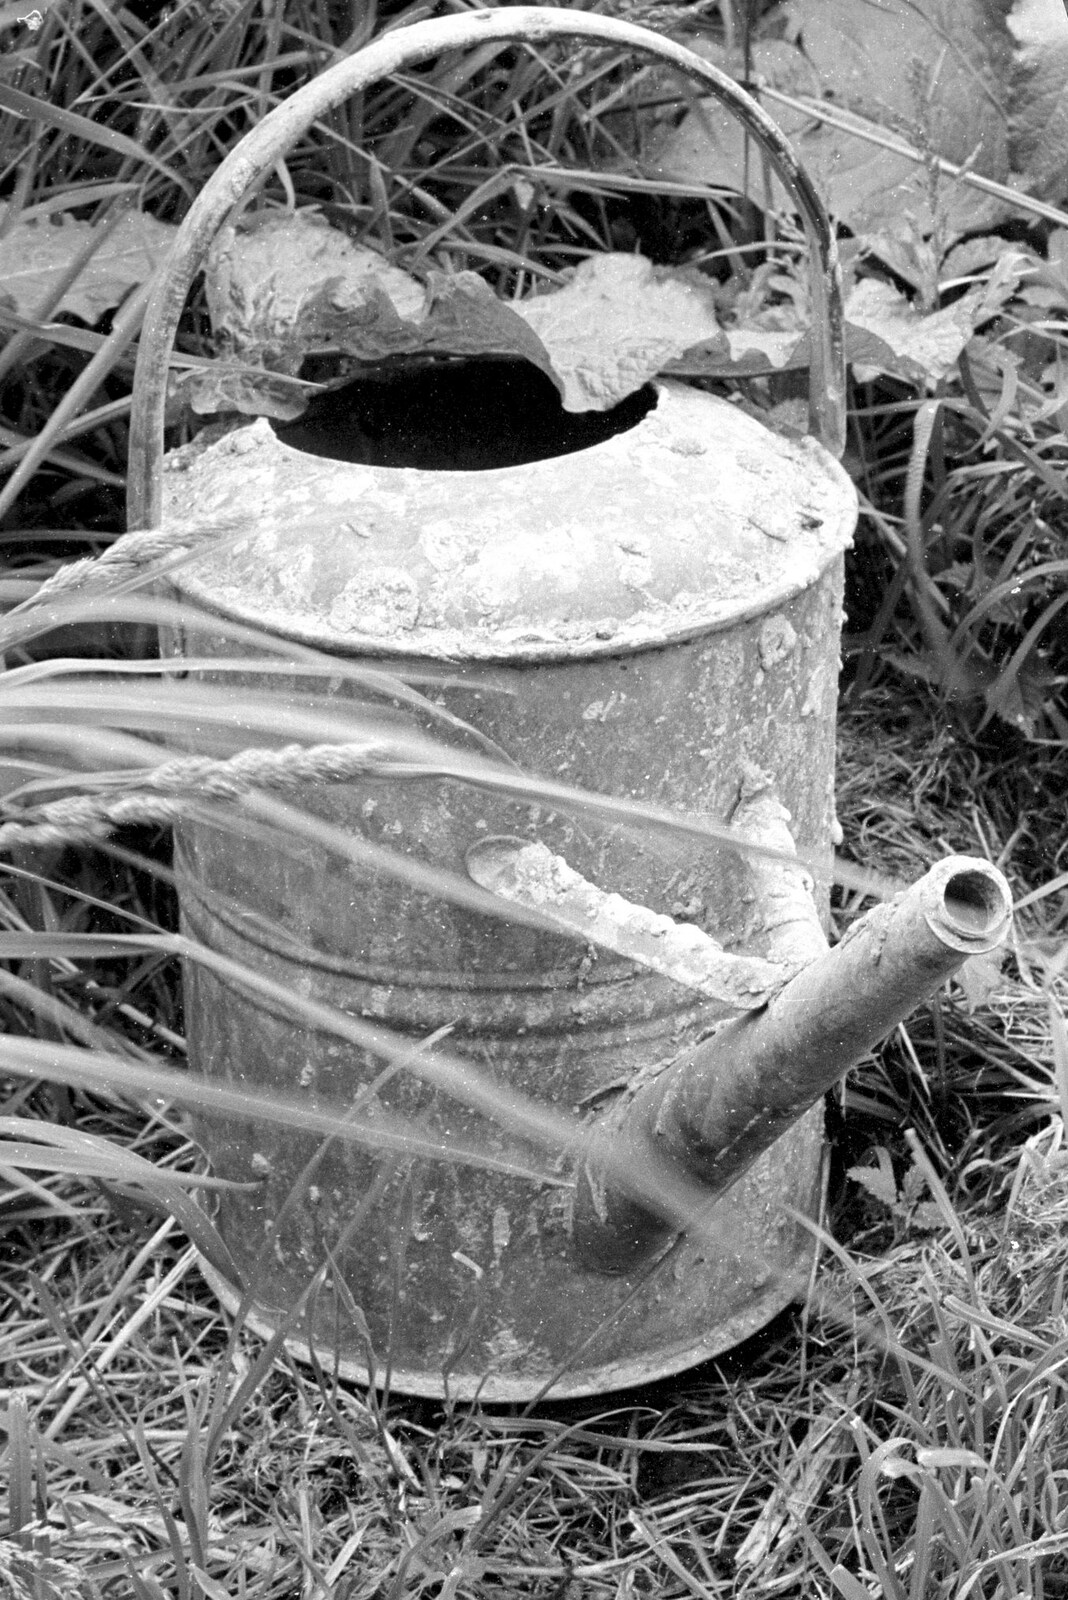 A Black and White Life in Concrete, Stuston, Suffolk - 3rd September 1992: An old watering can looks like it has barnacles